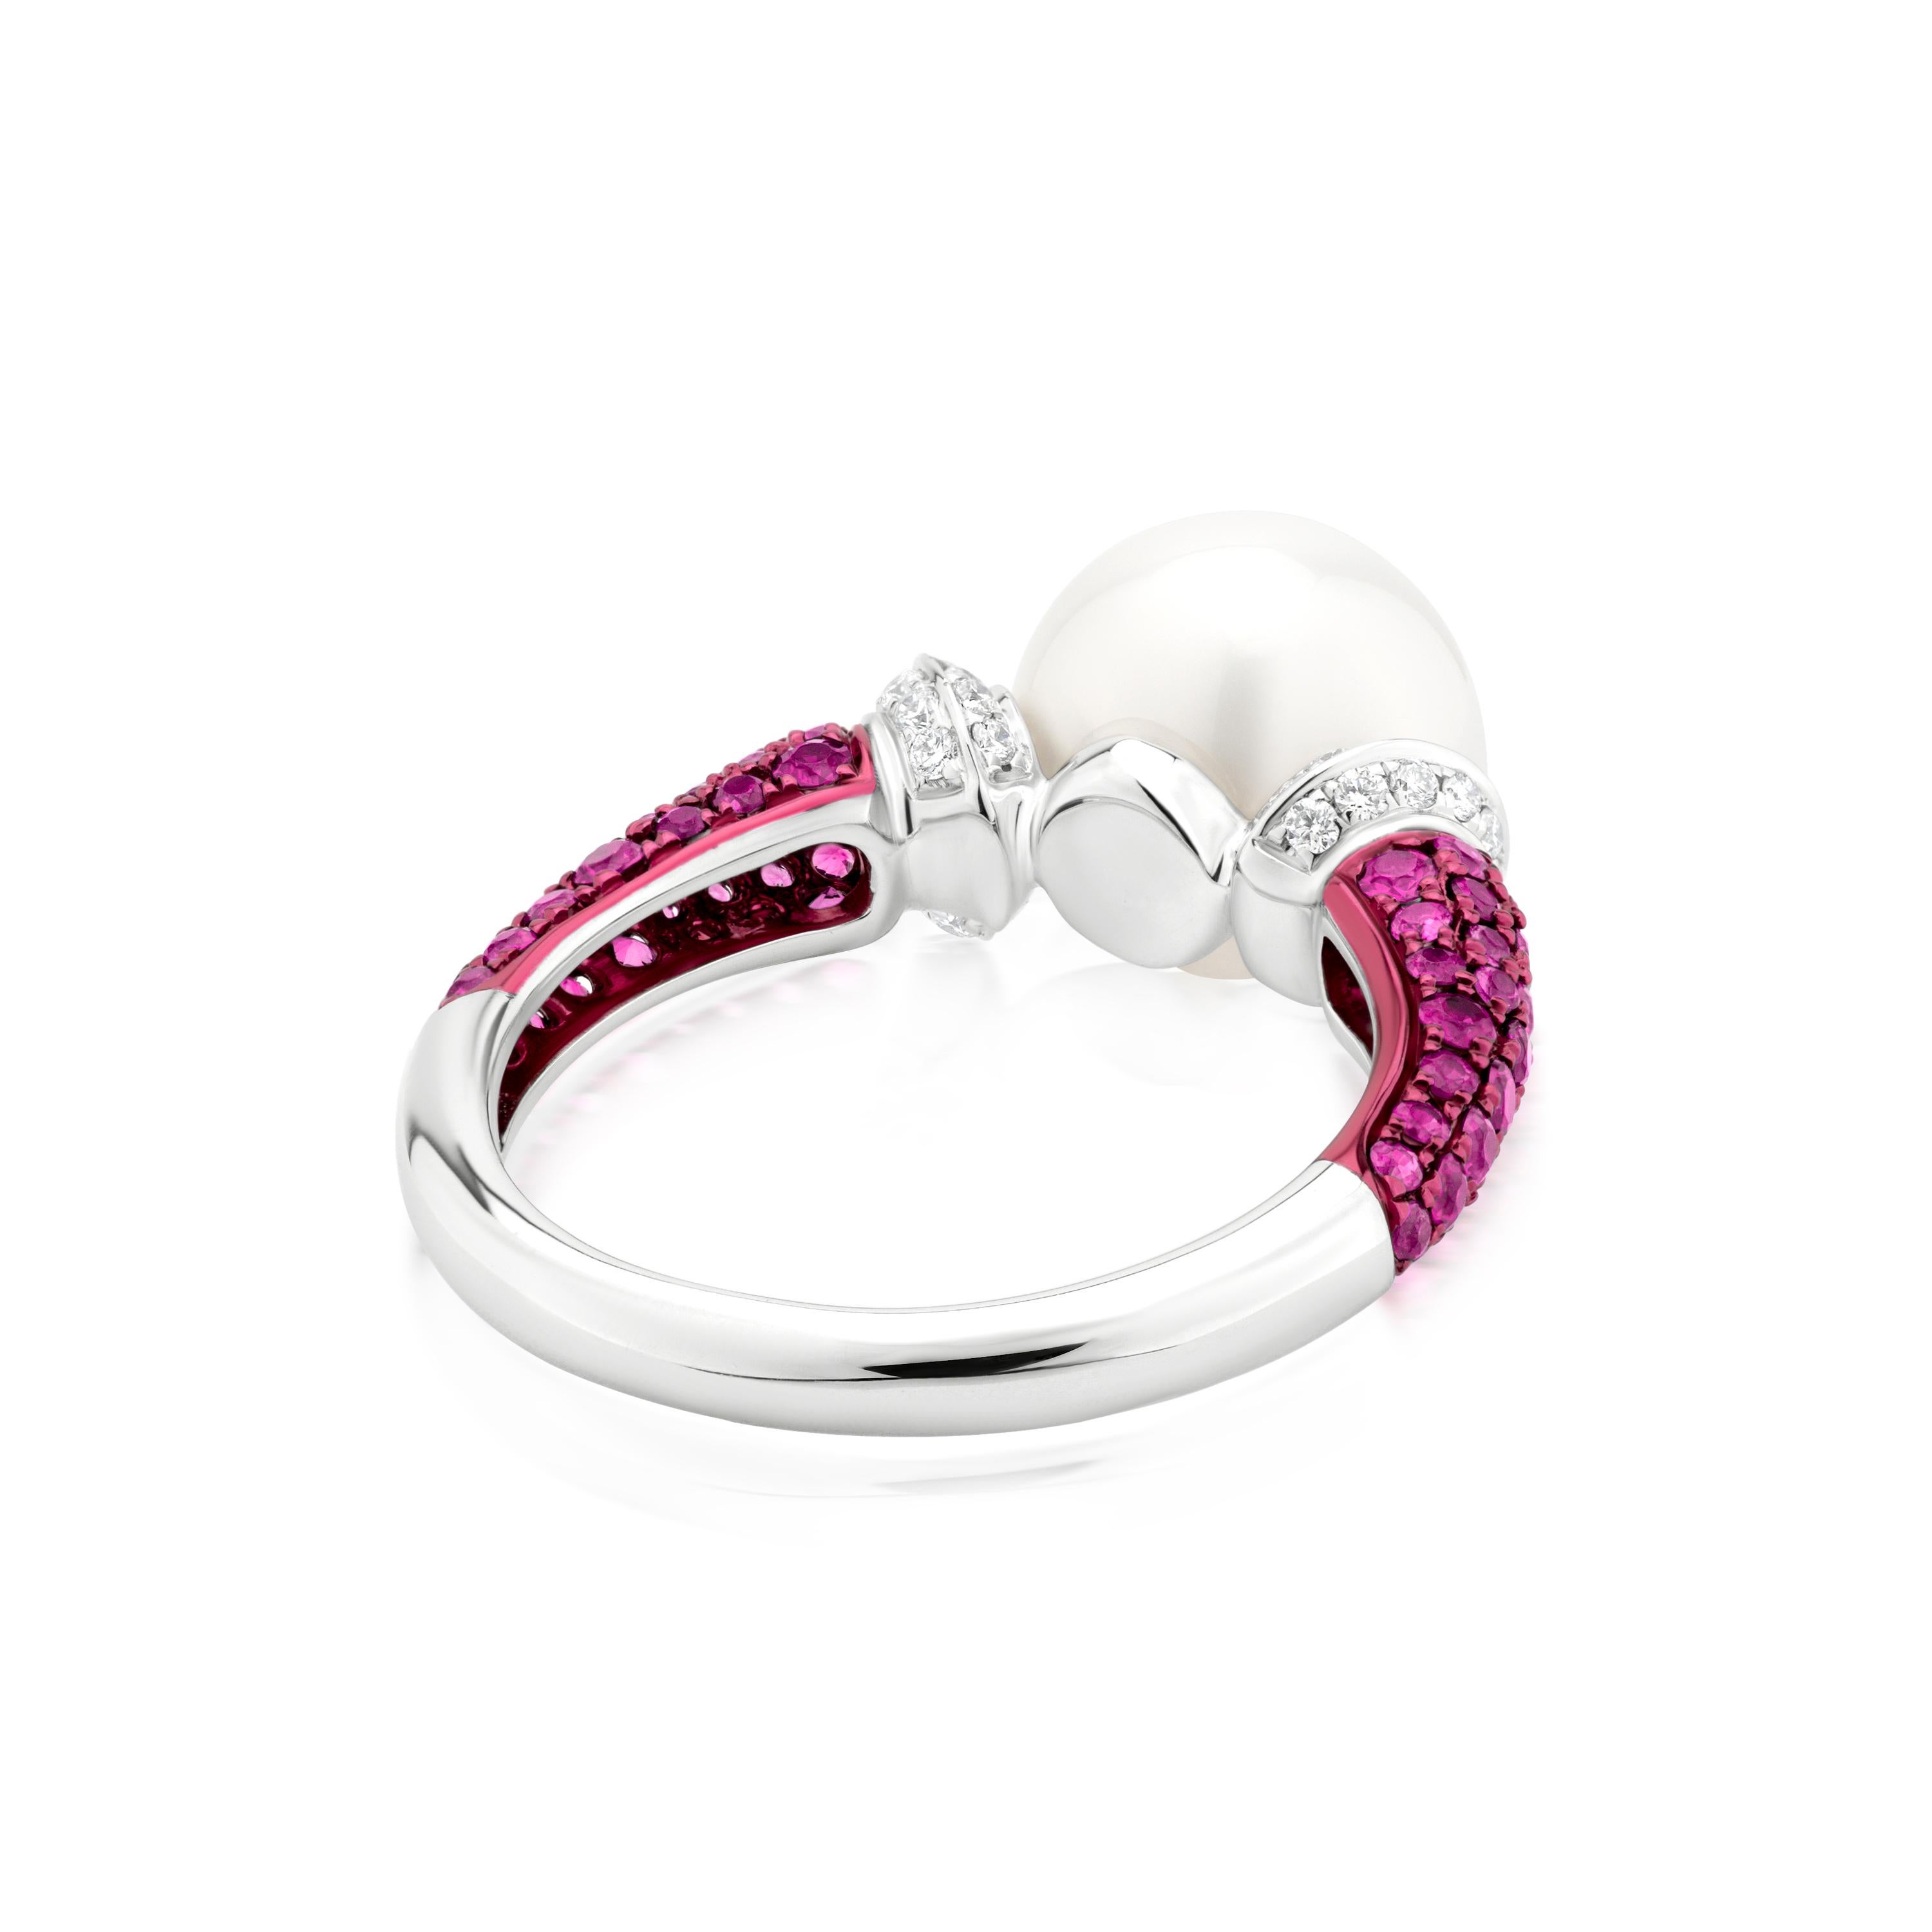 Contemporary Luxle South Sea Pearl, Ruby and Diamond Engagement Ring in 18k White Gold